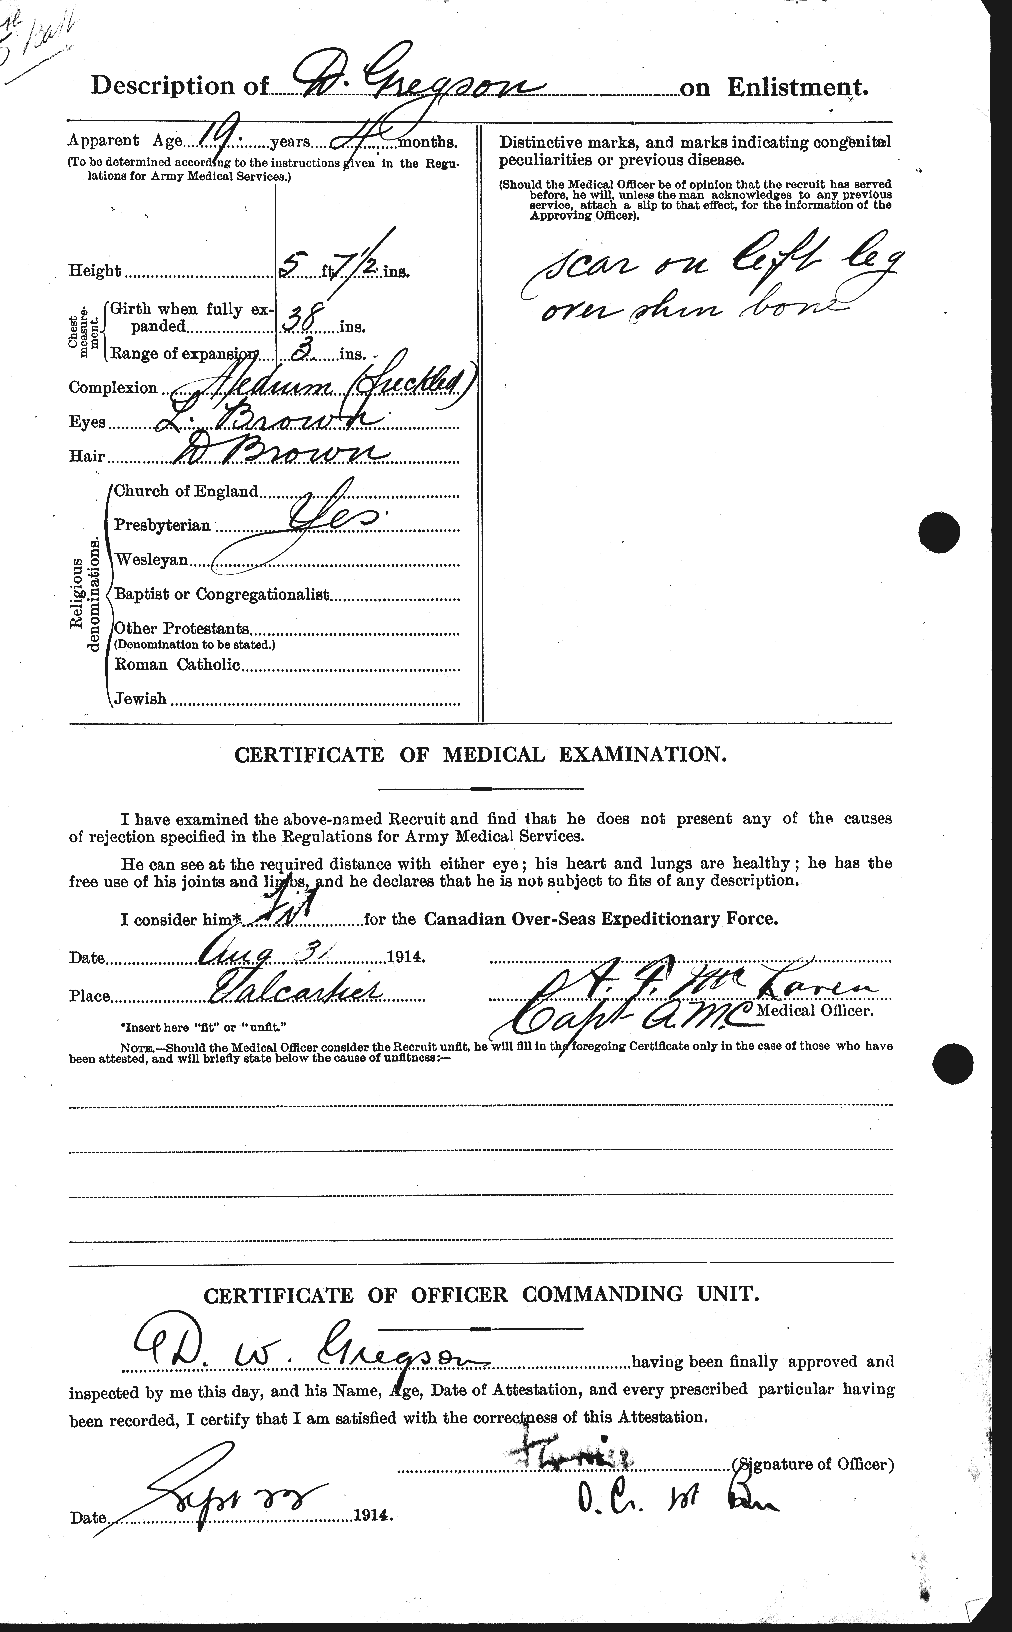 Personnel Records of the First World War - CEF 363098b